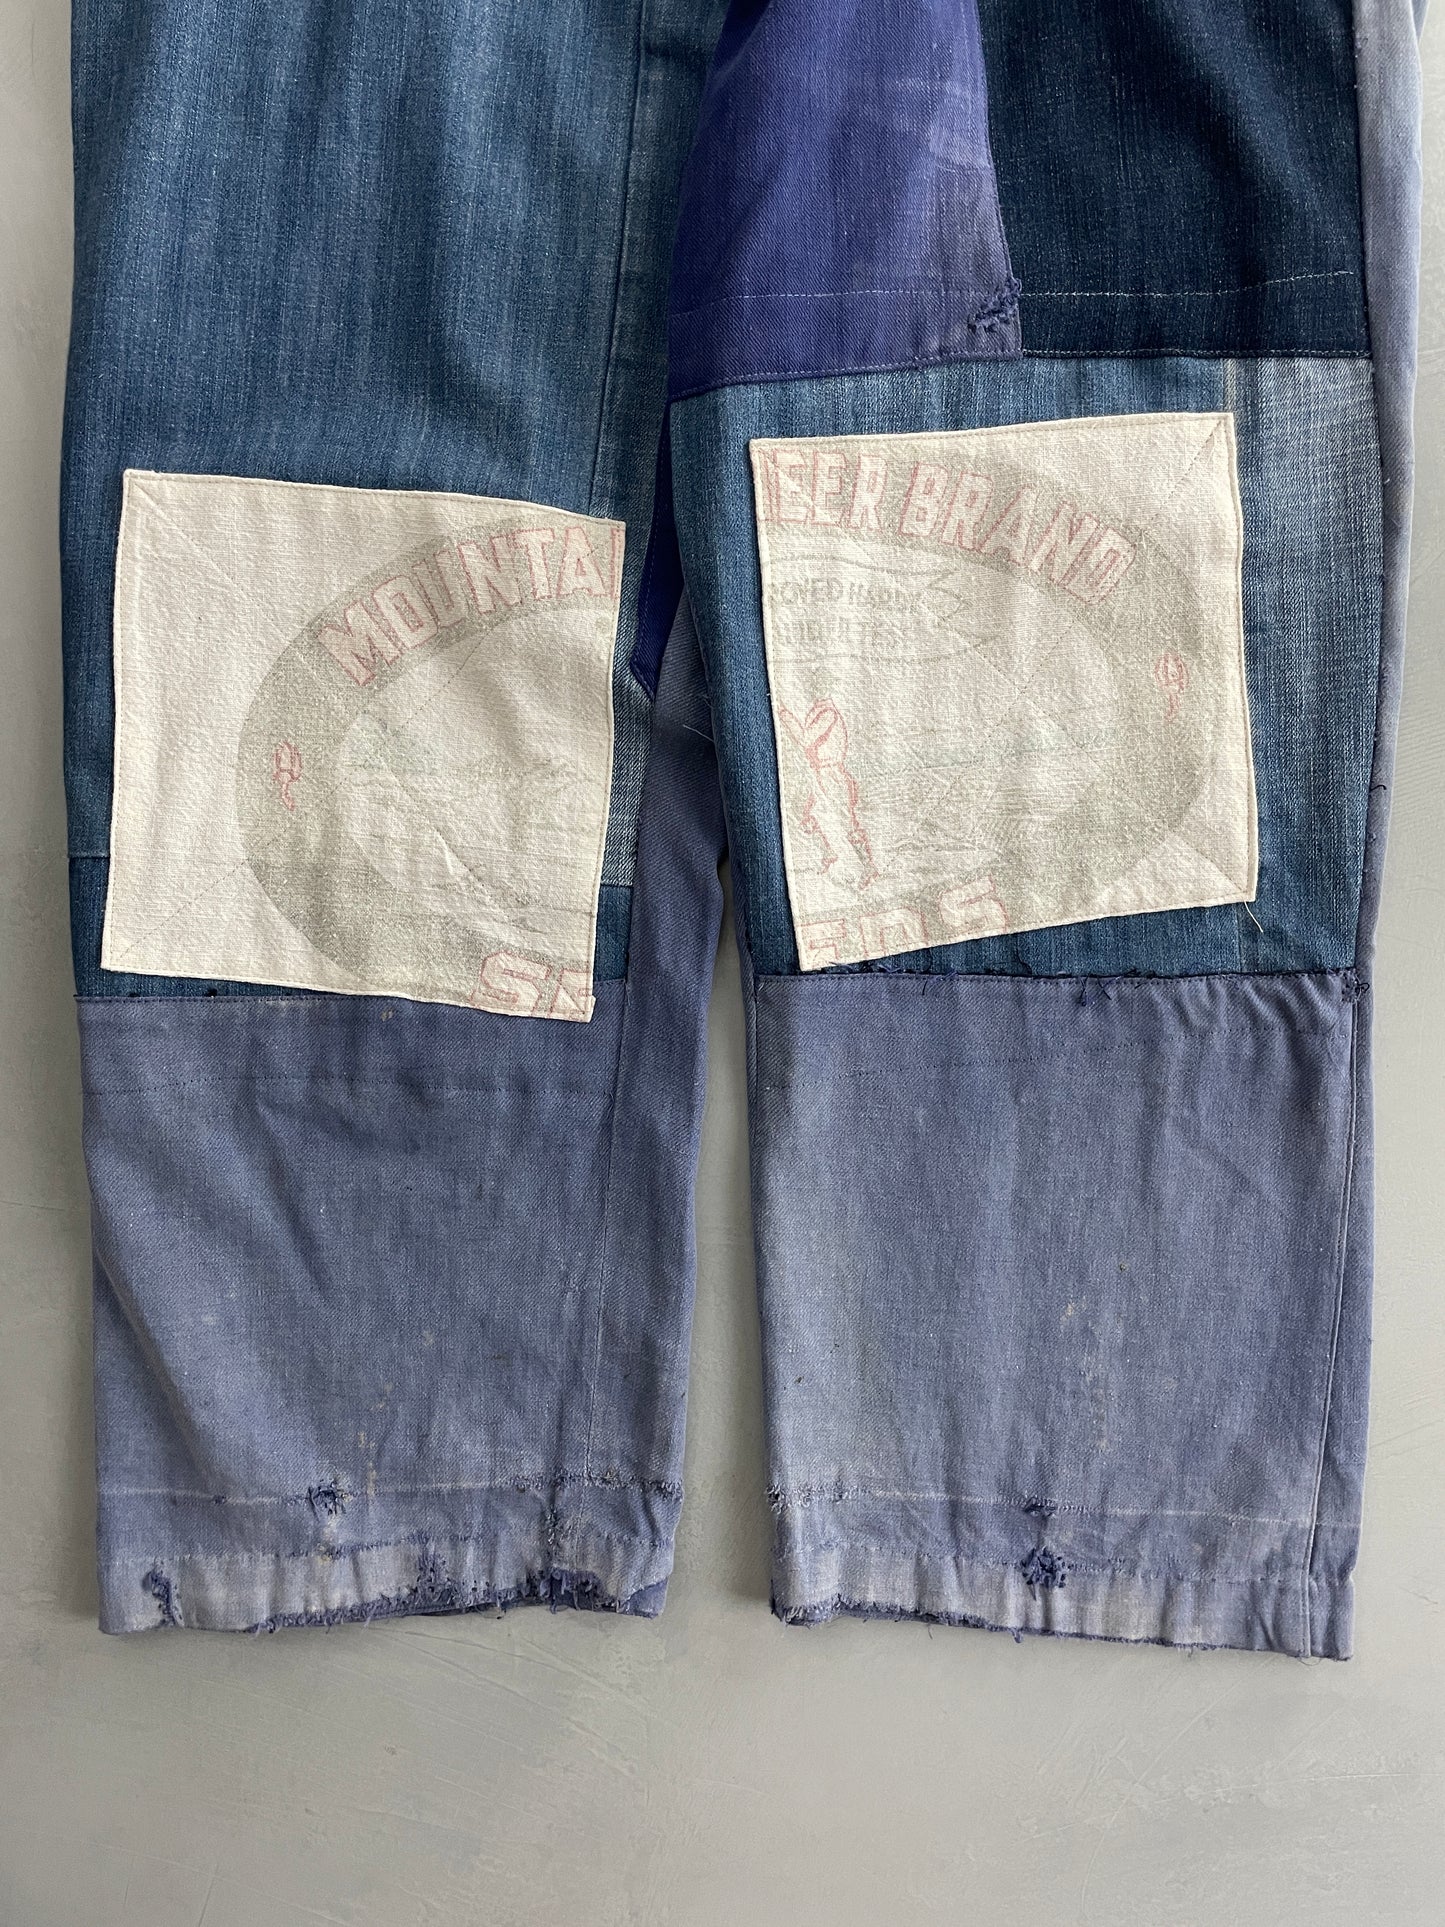 Patch/Repaired French Work Pants [35"]